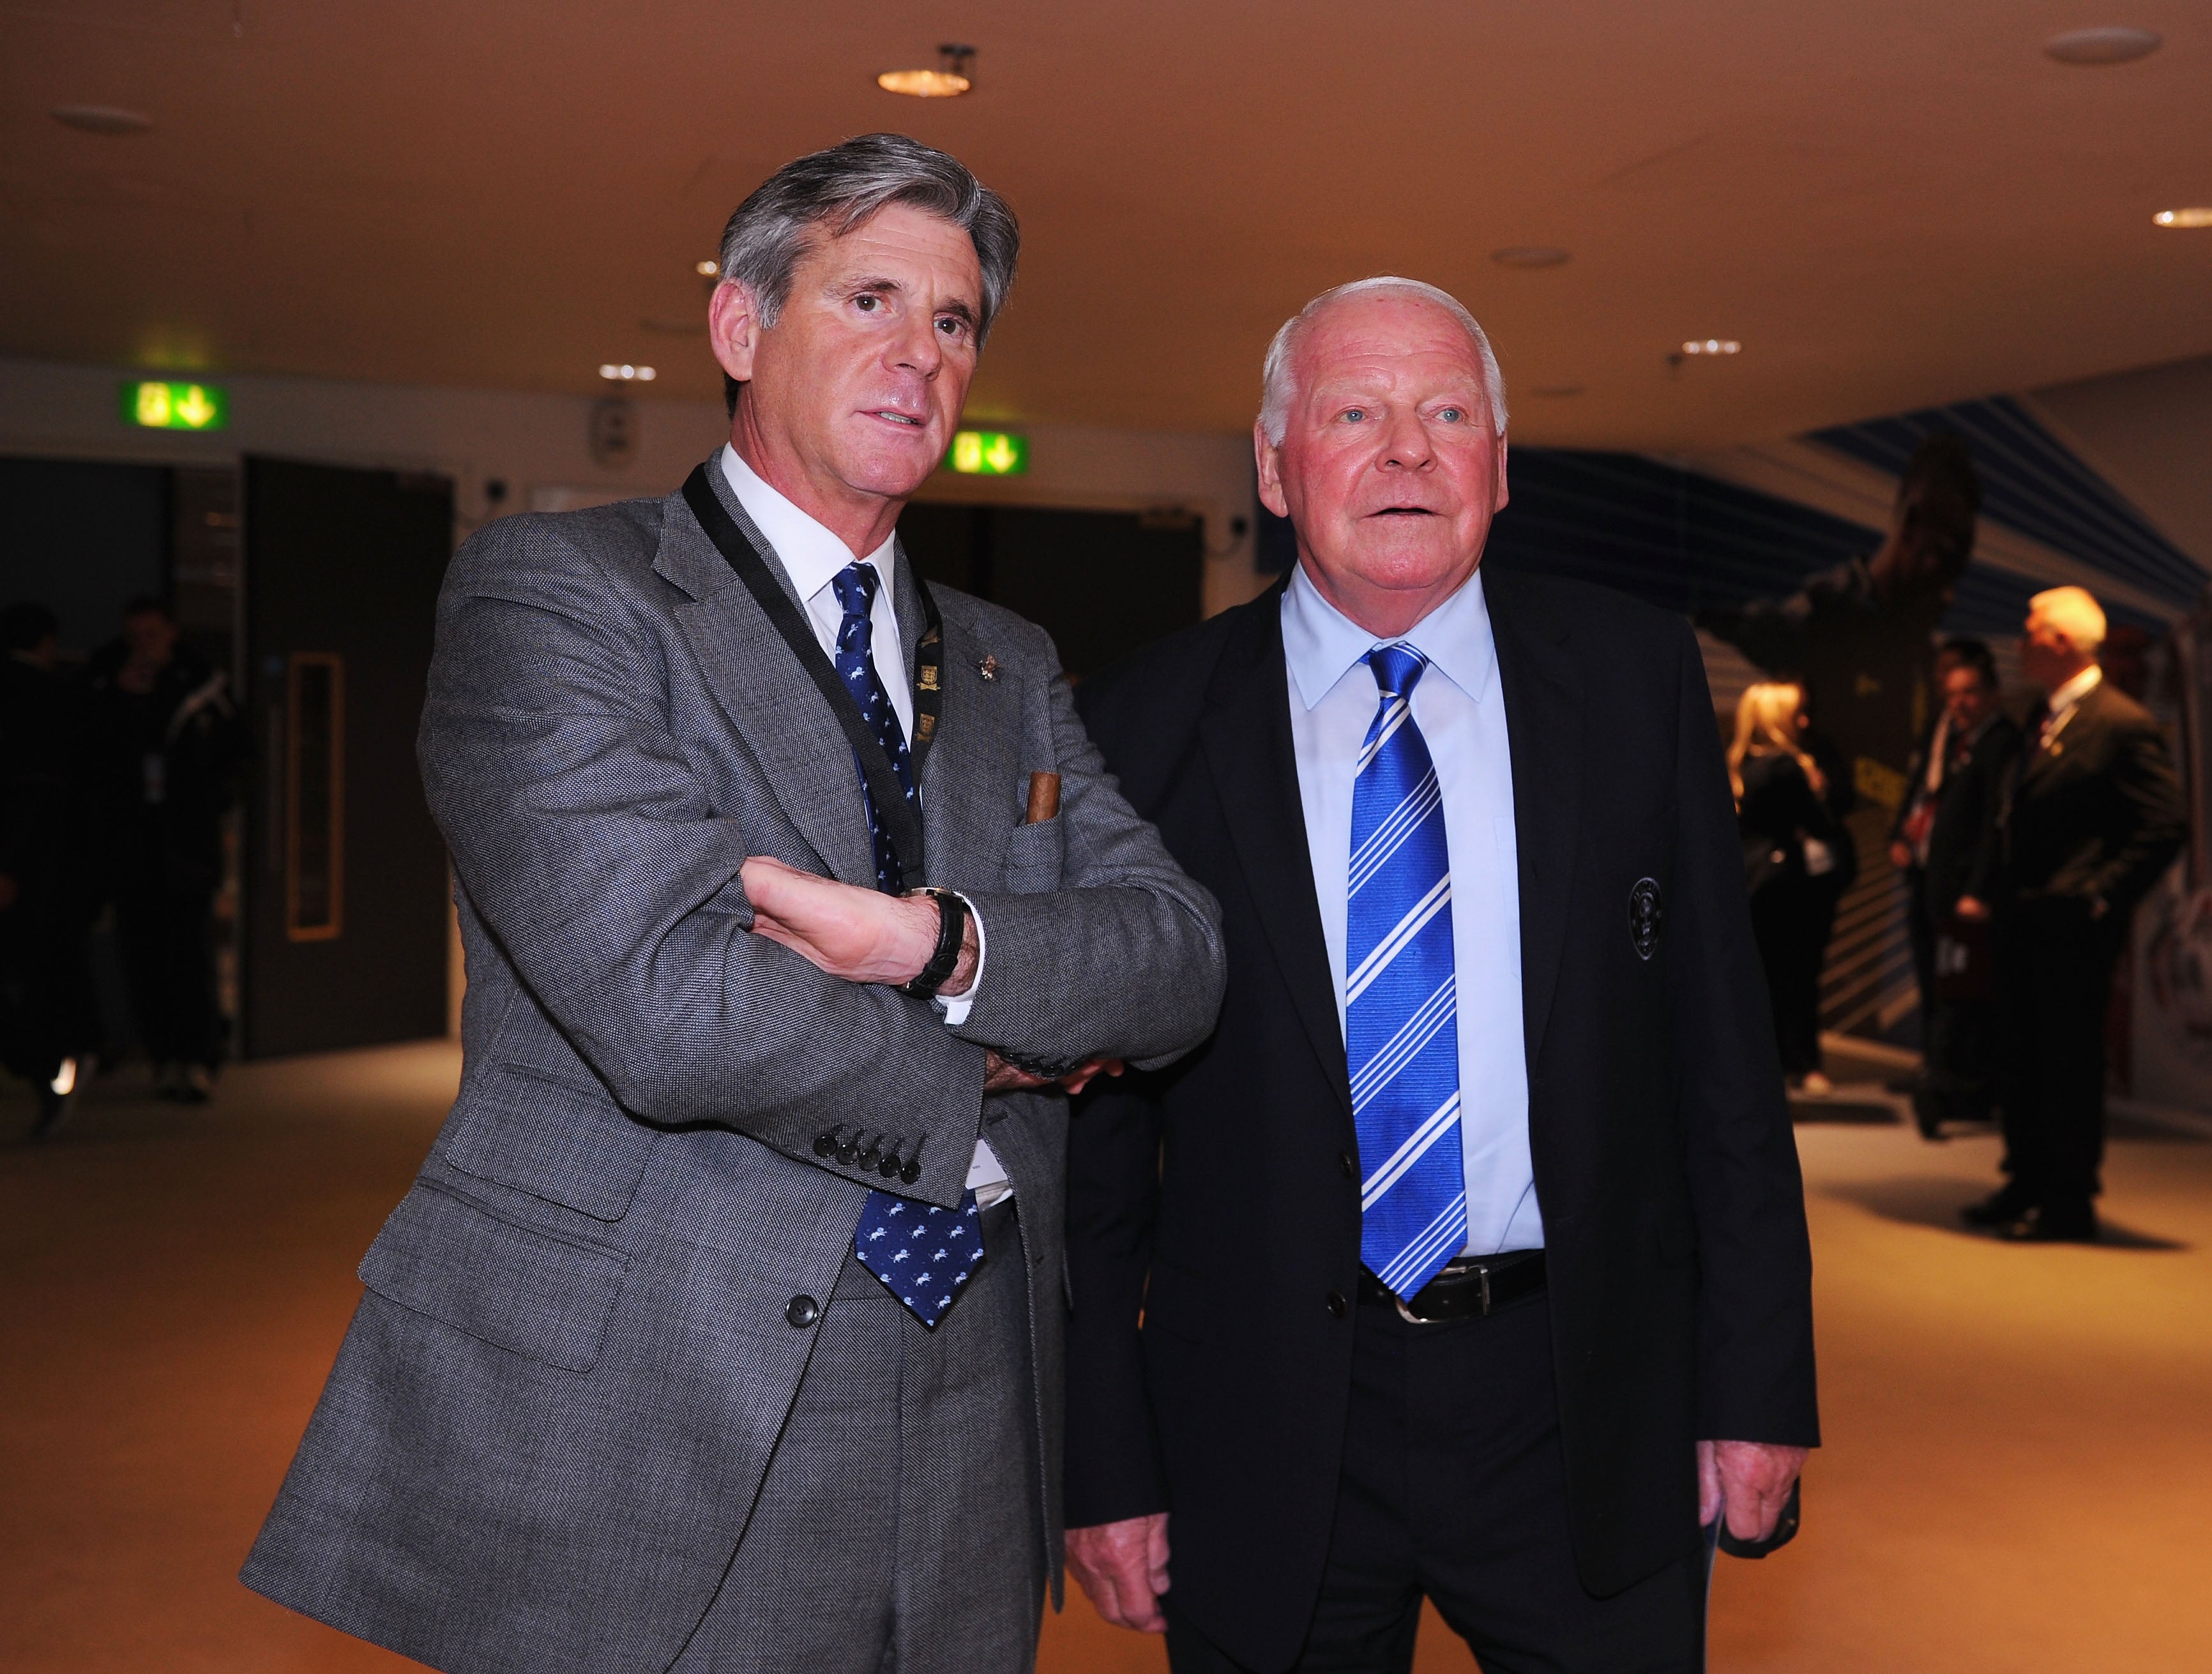 John Berylson (seen here with former Wigan chairman Dave Whelan) first got involved with Millwall in 2006